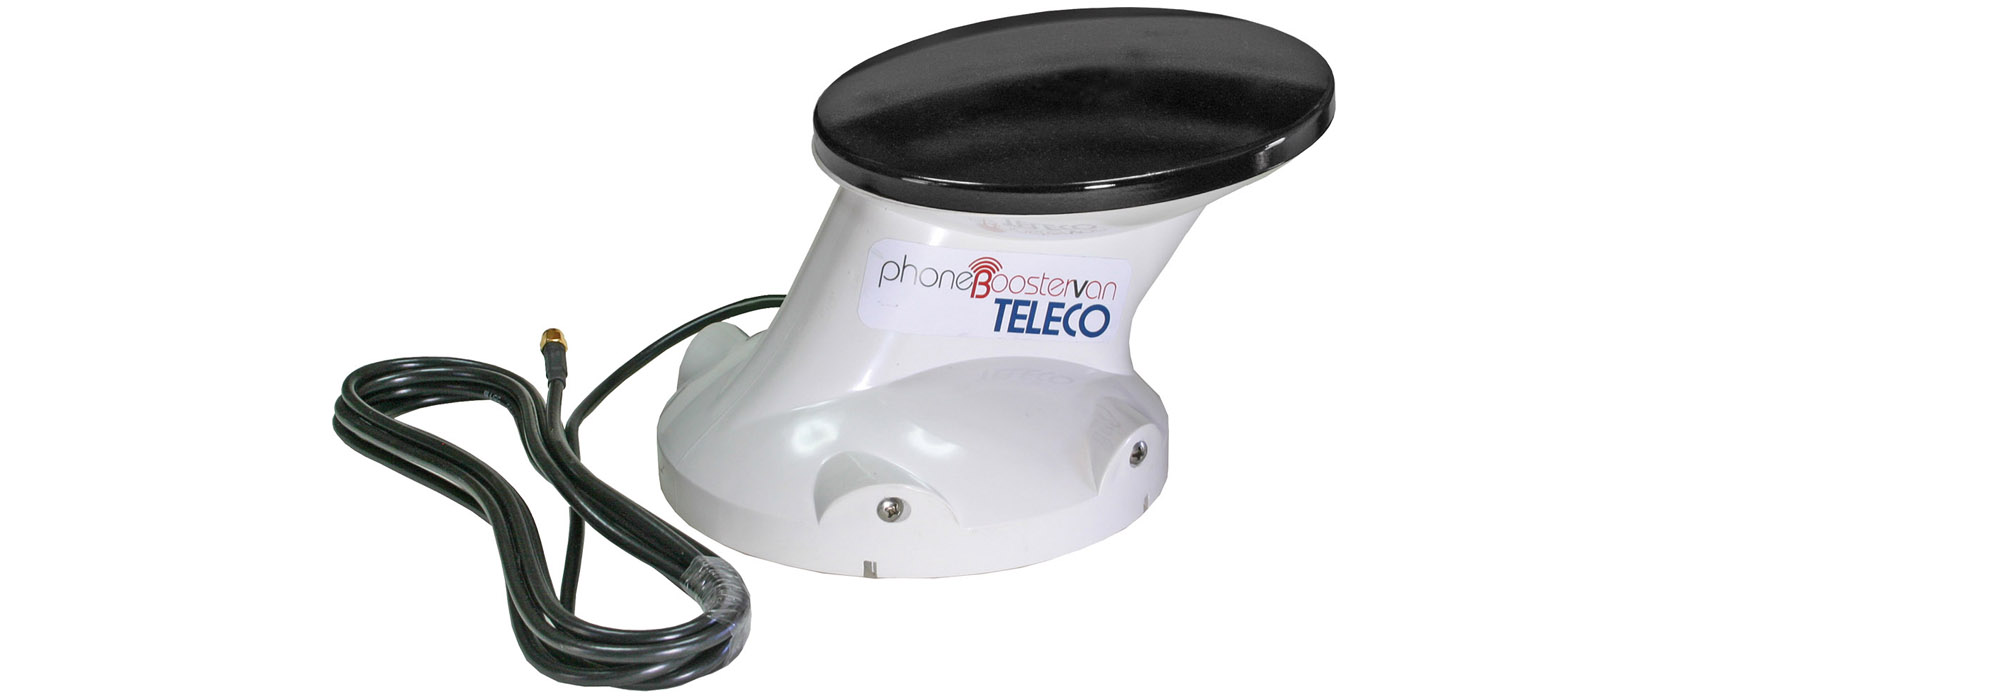 TELECO PhoneBoosterVan 2.0: greater performance with the new antenna